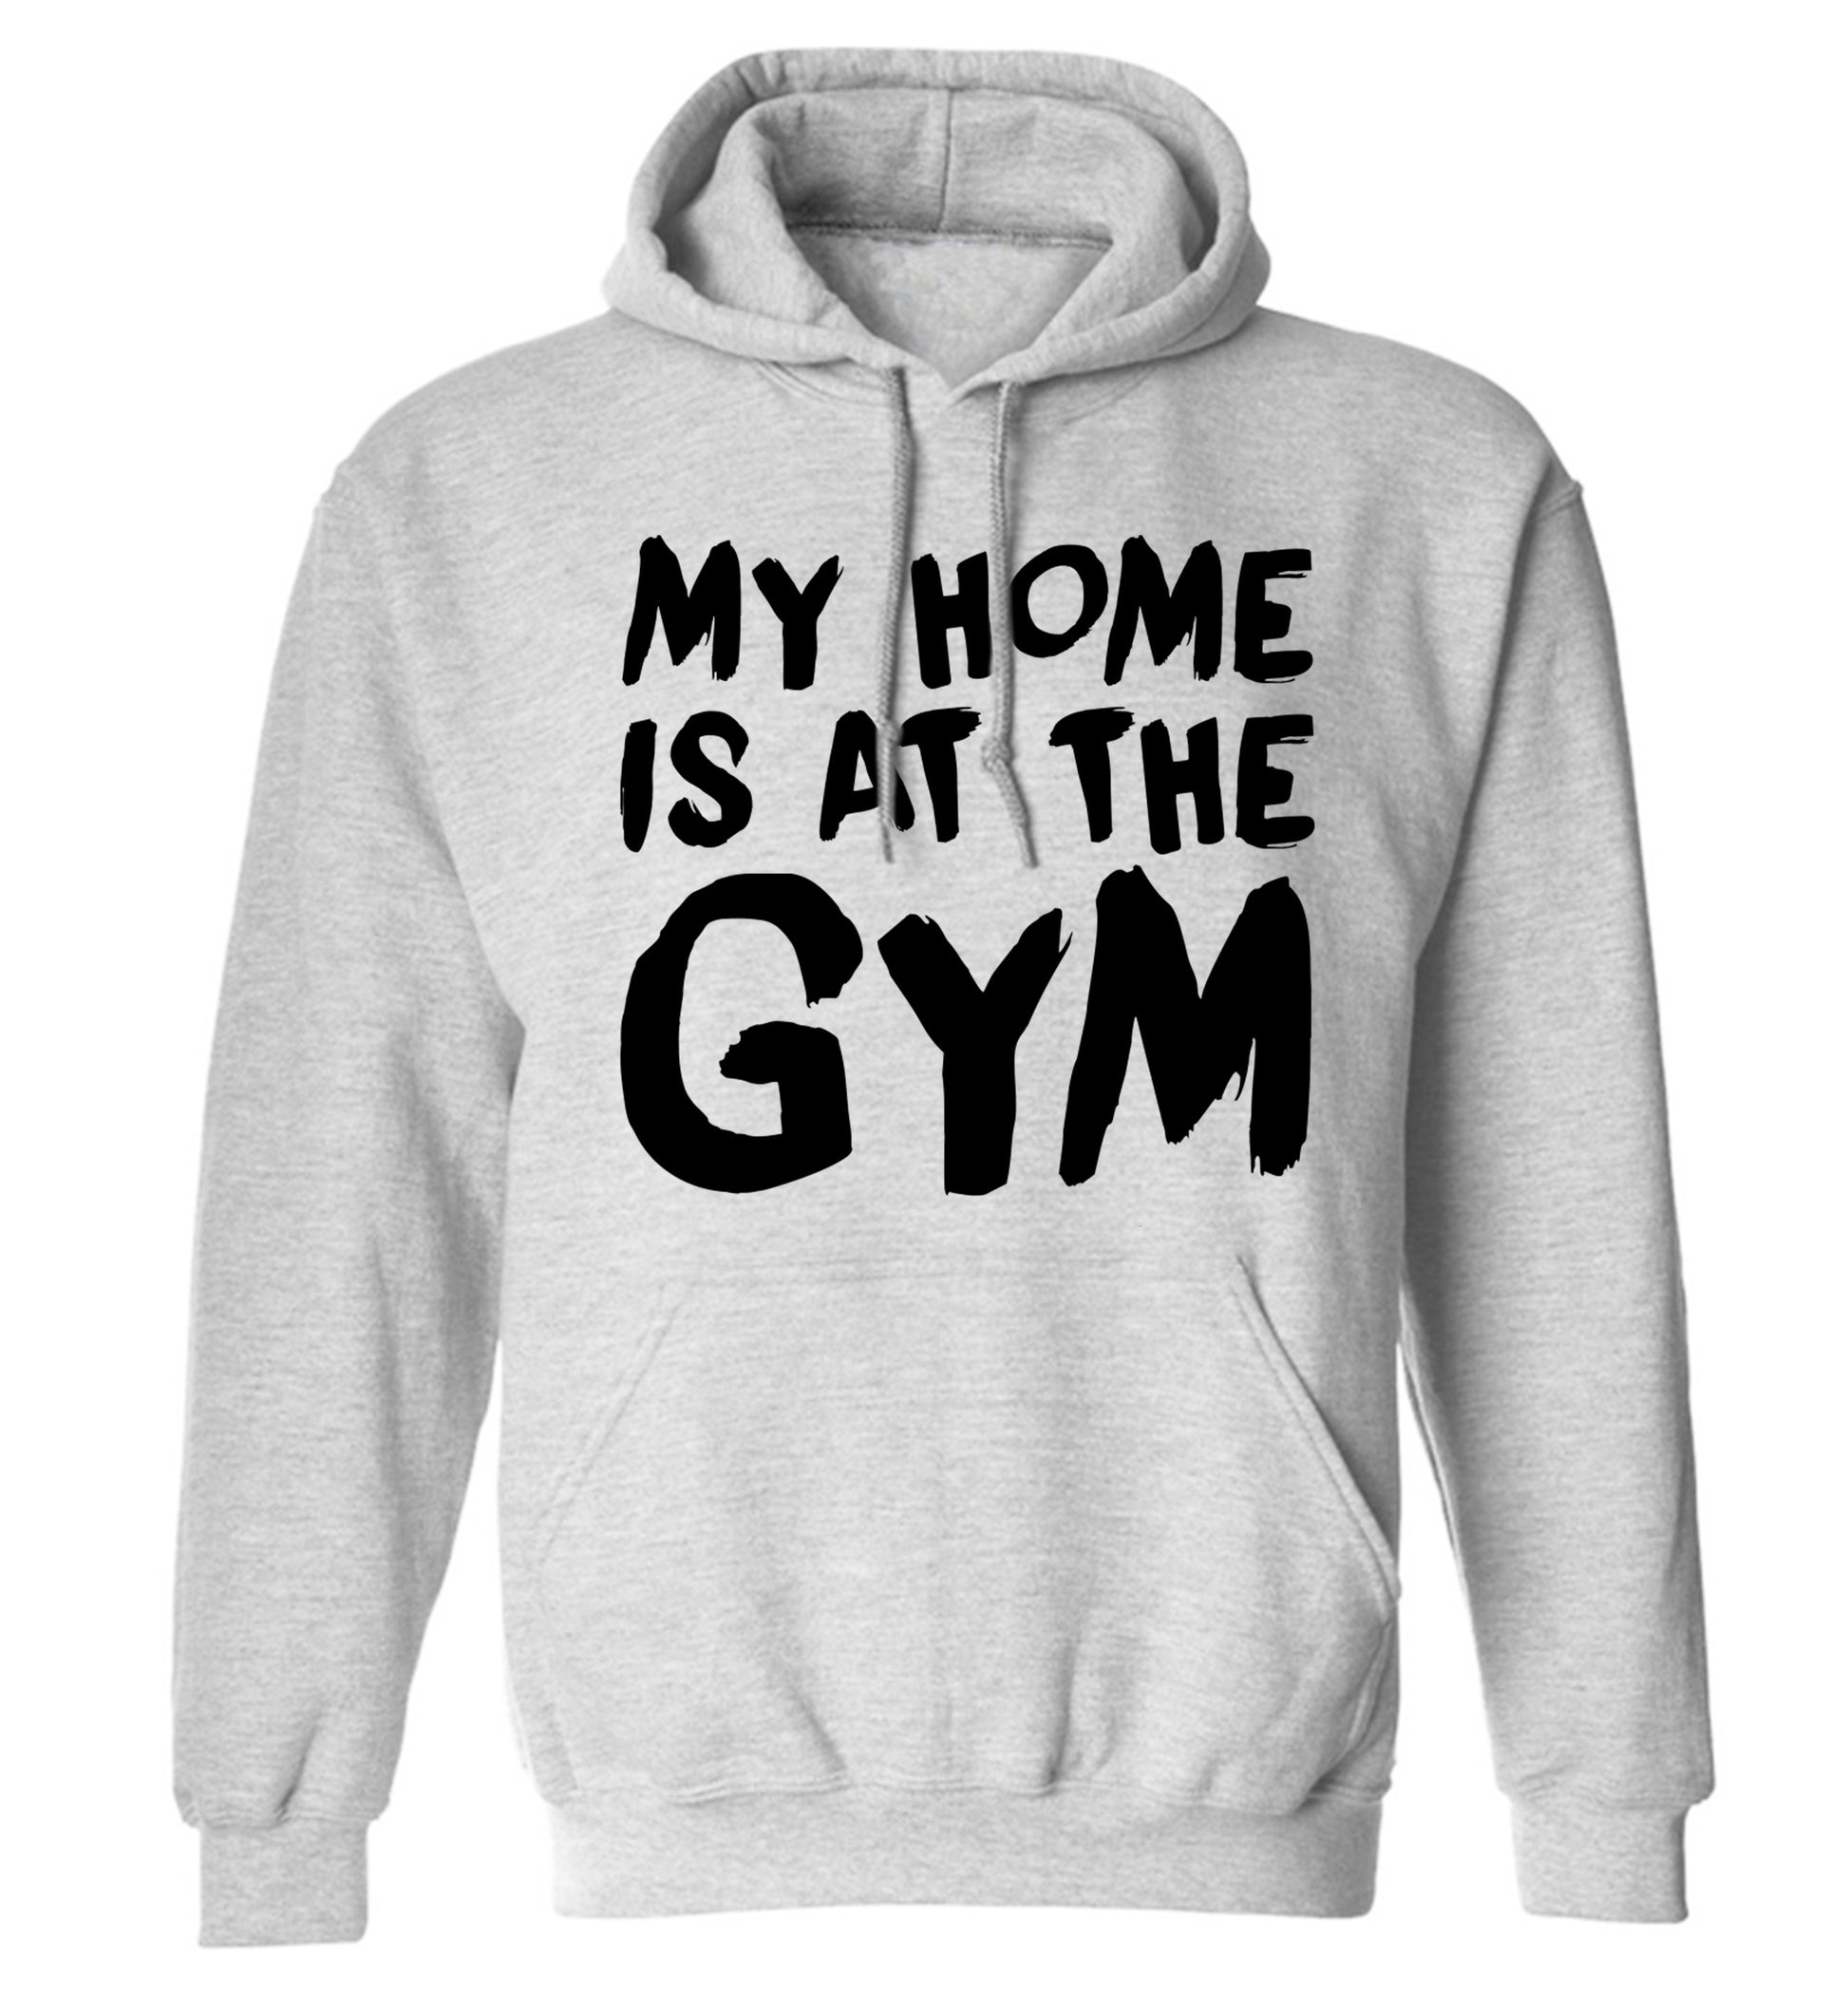 My home is at the gym adults unisex grey hoodie 2XL